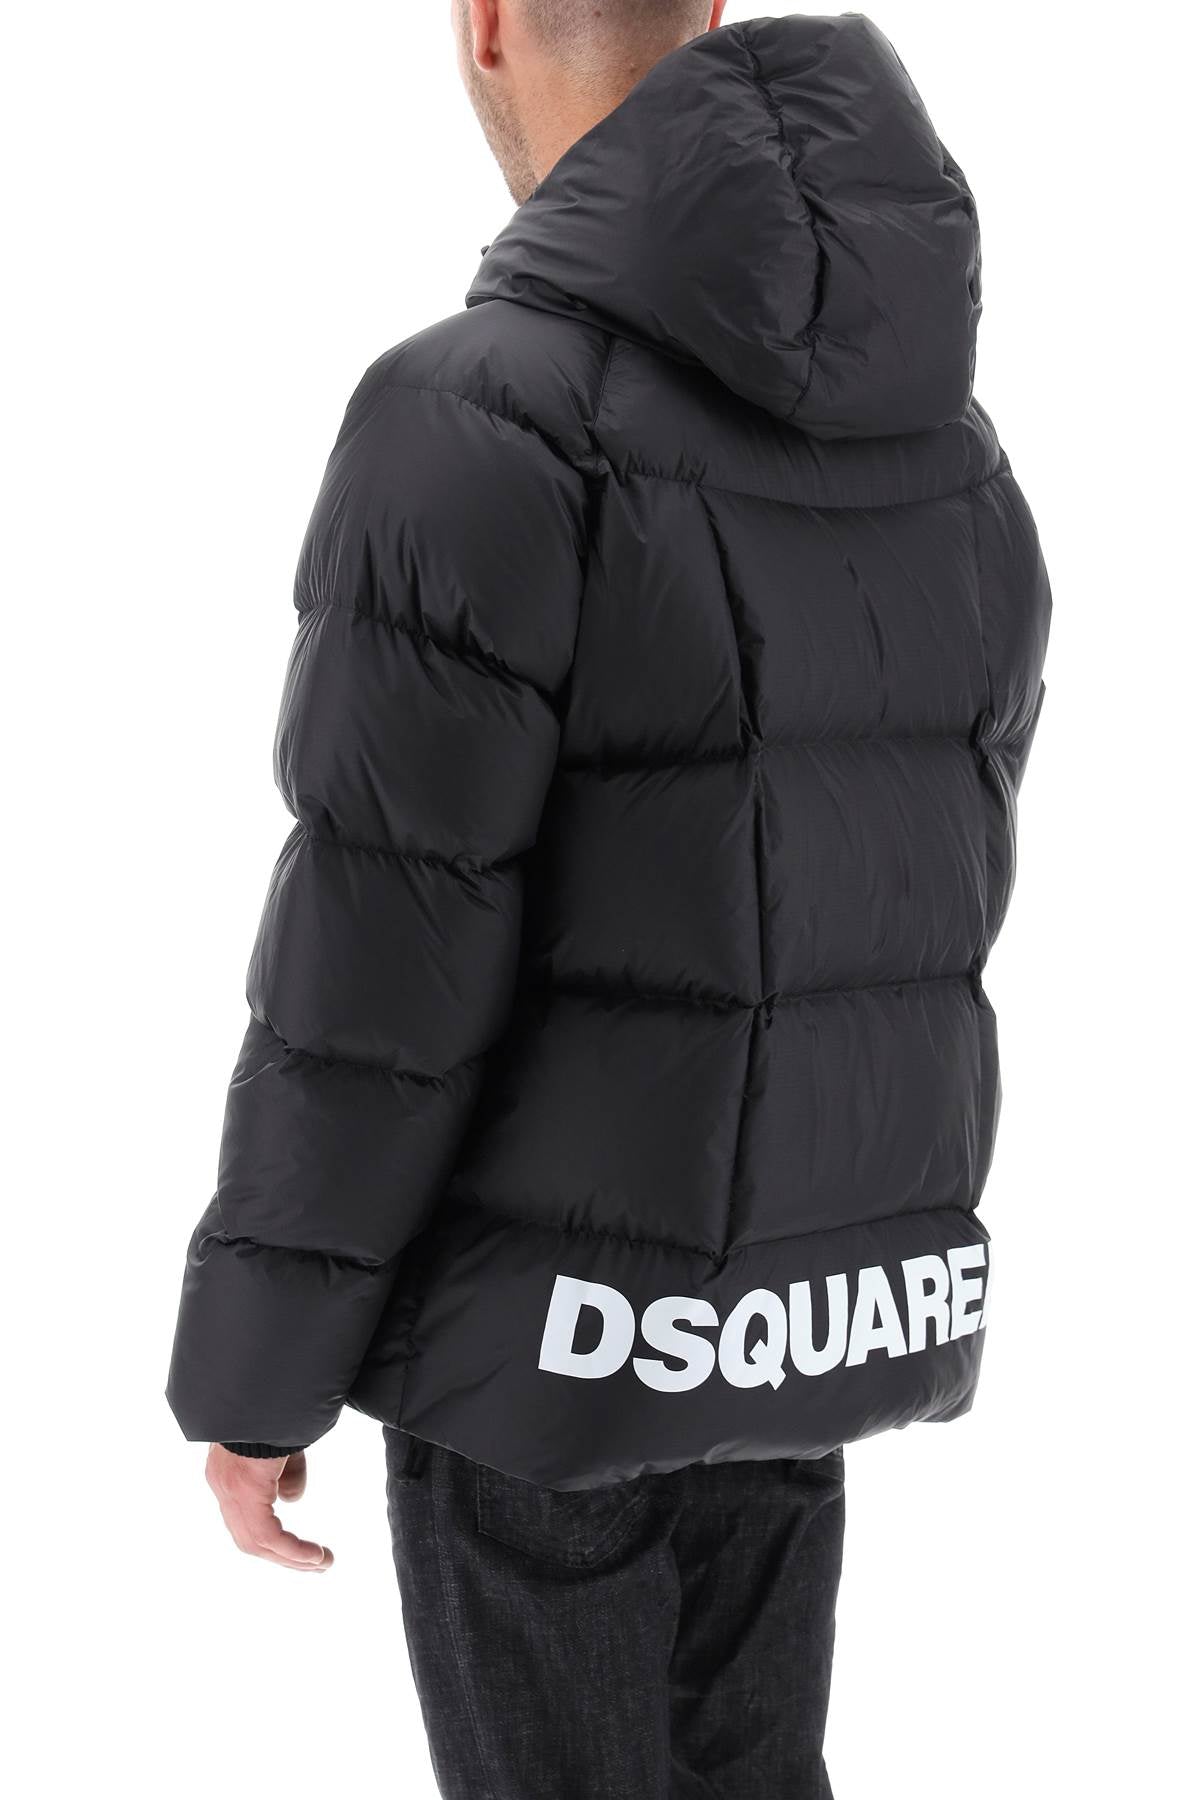 DSQUARED2 Mens Black Outerwear for FW23